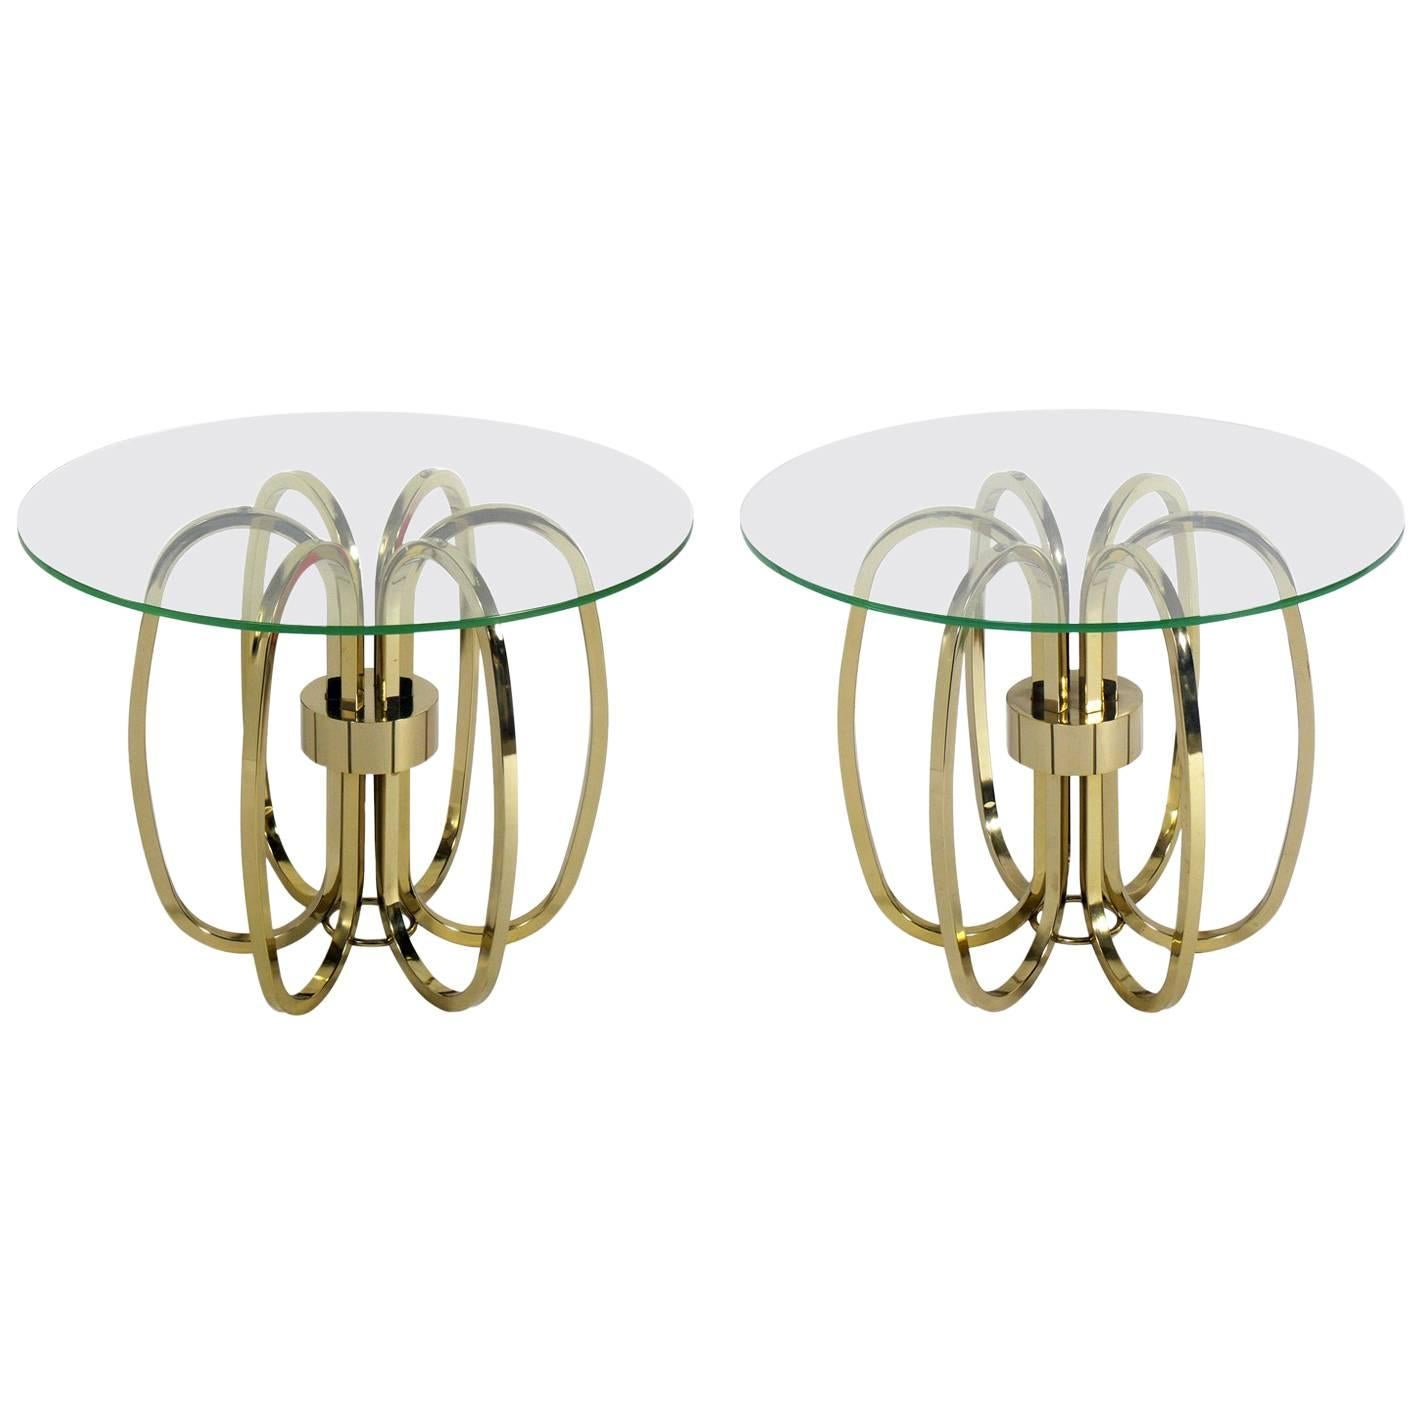 Pair of Sculptural Brass Loop Tables For Sale